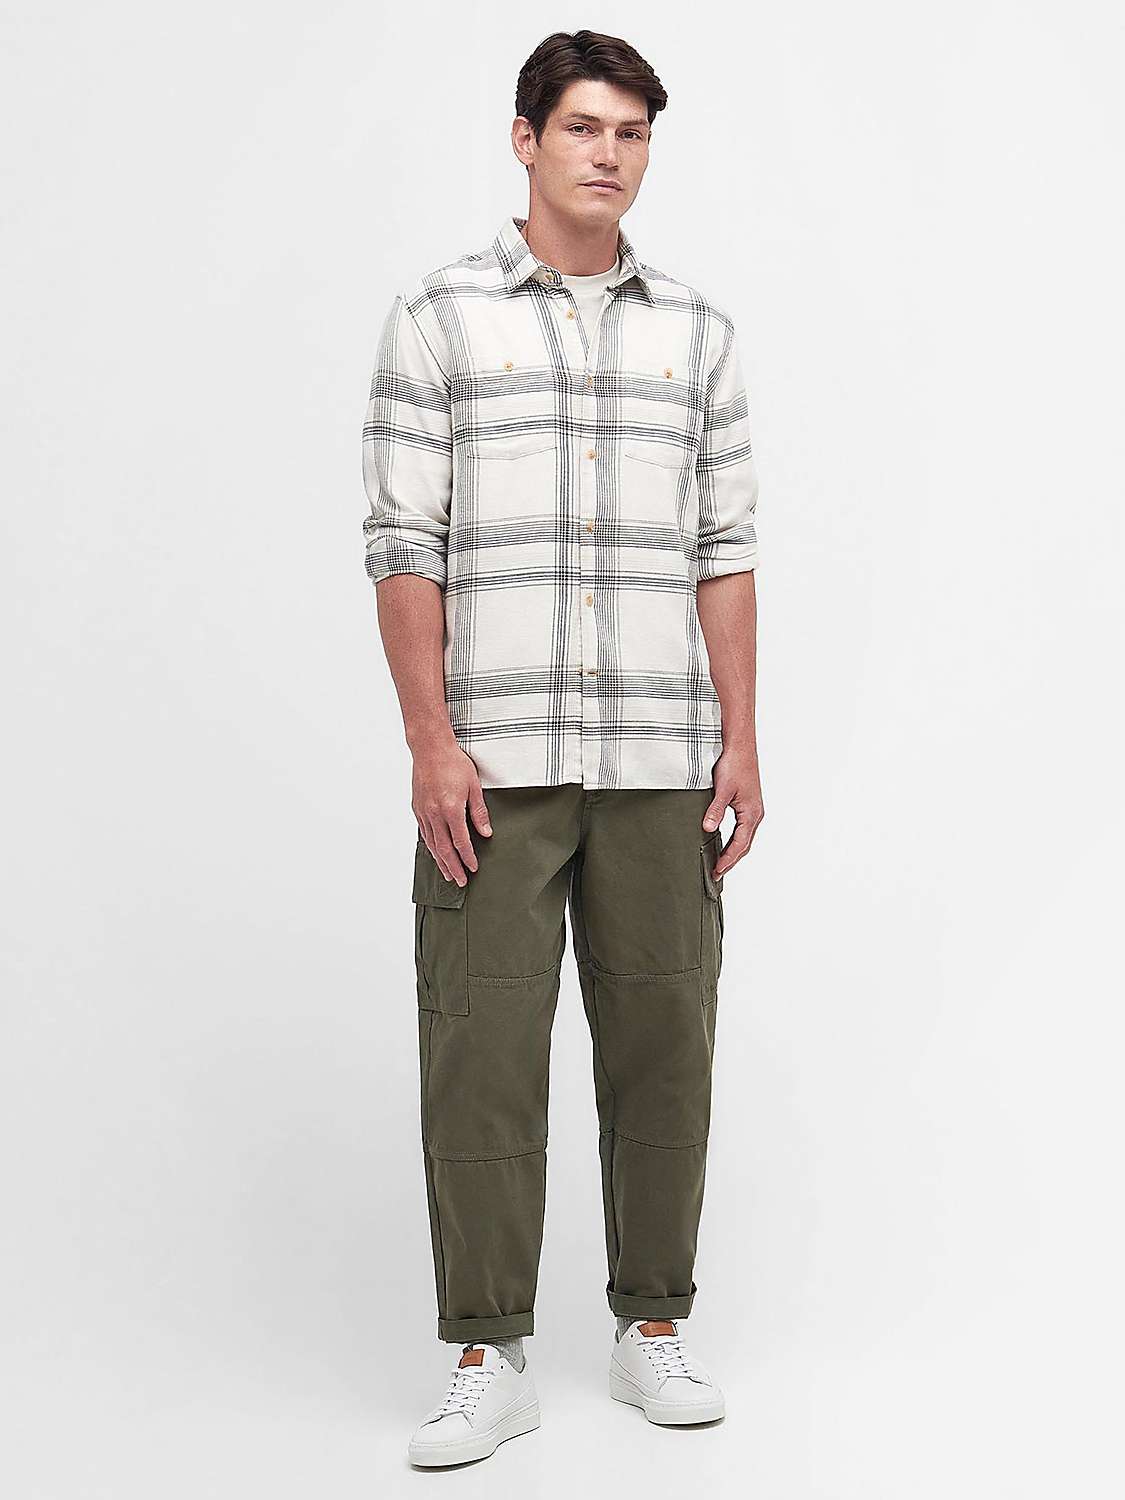 Buy Barbour Newhaven Tailored Shirt, Ecru/Multi Online at johnlewis.com